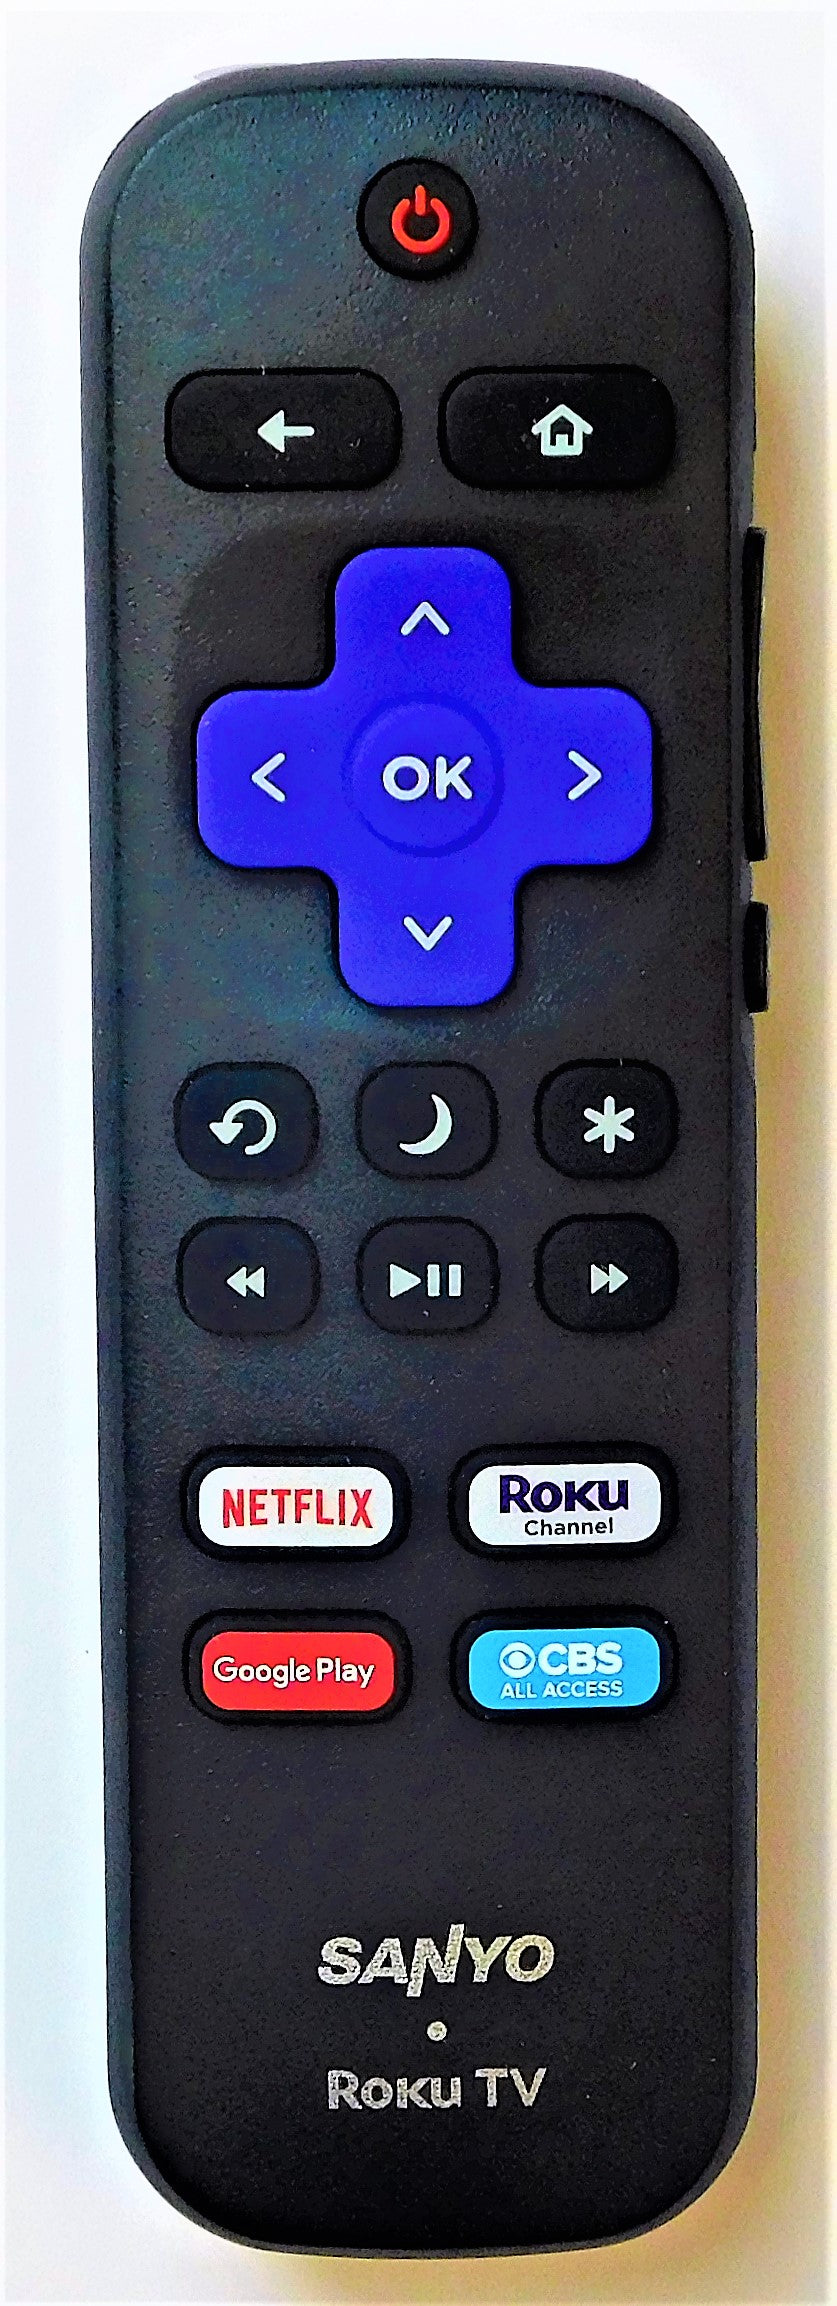 OEM replacement remote control for Sanyo Roku TV URMT21CND012